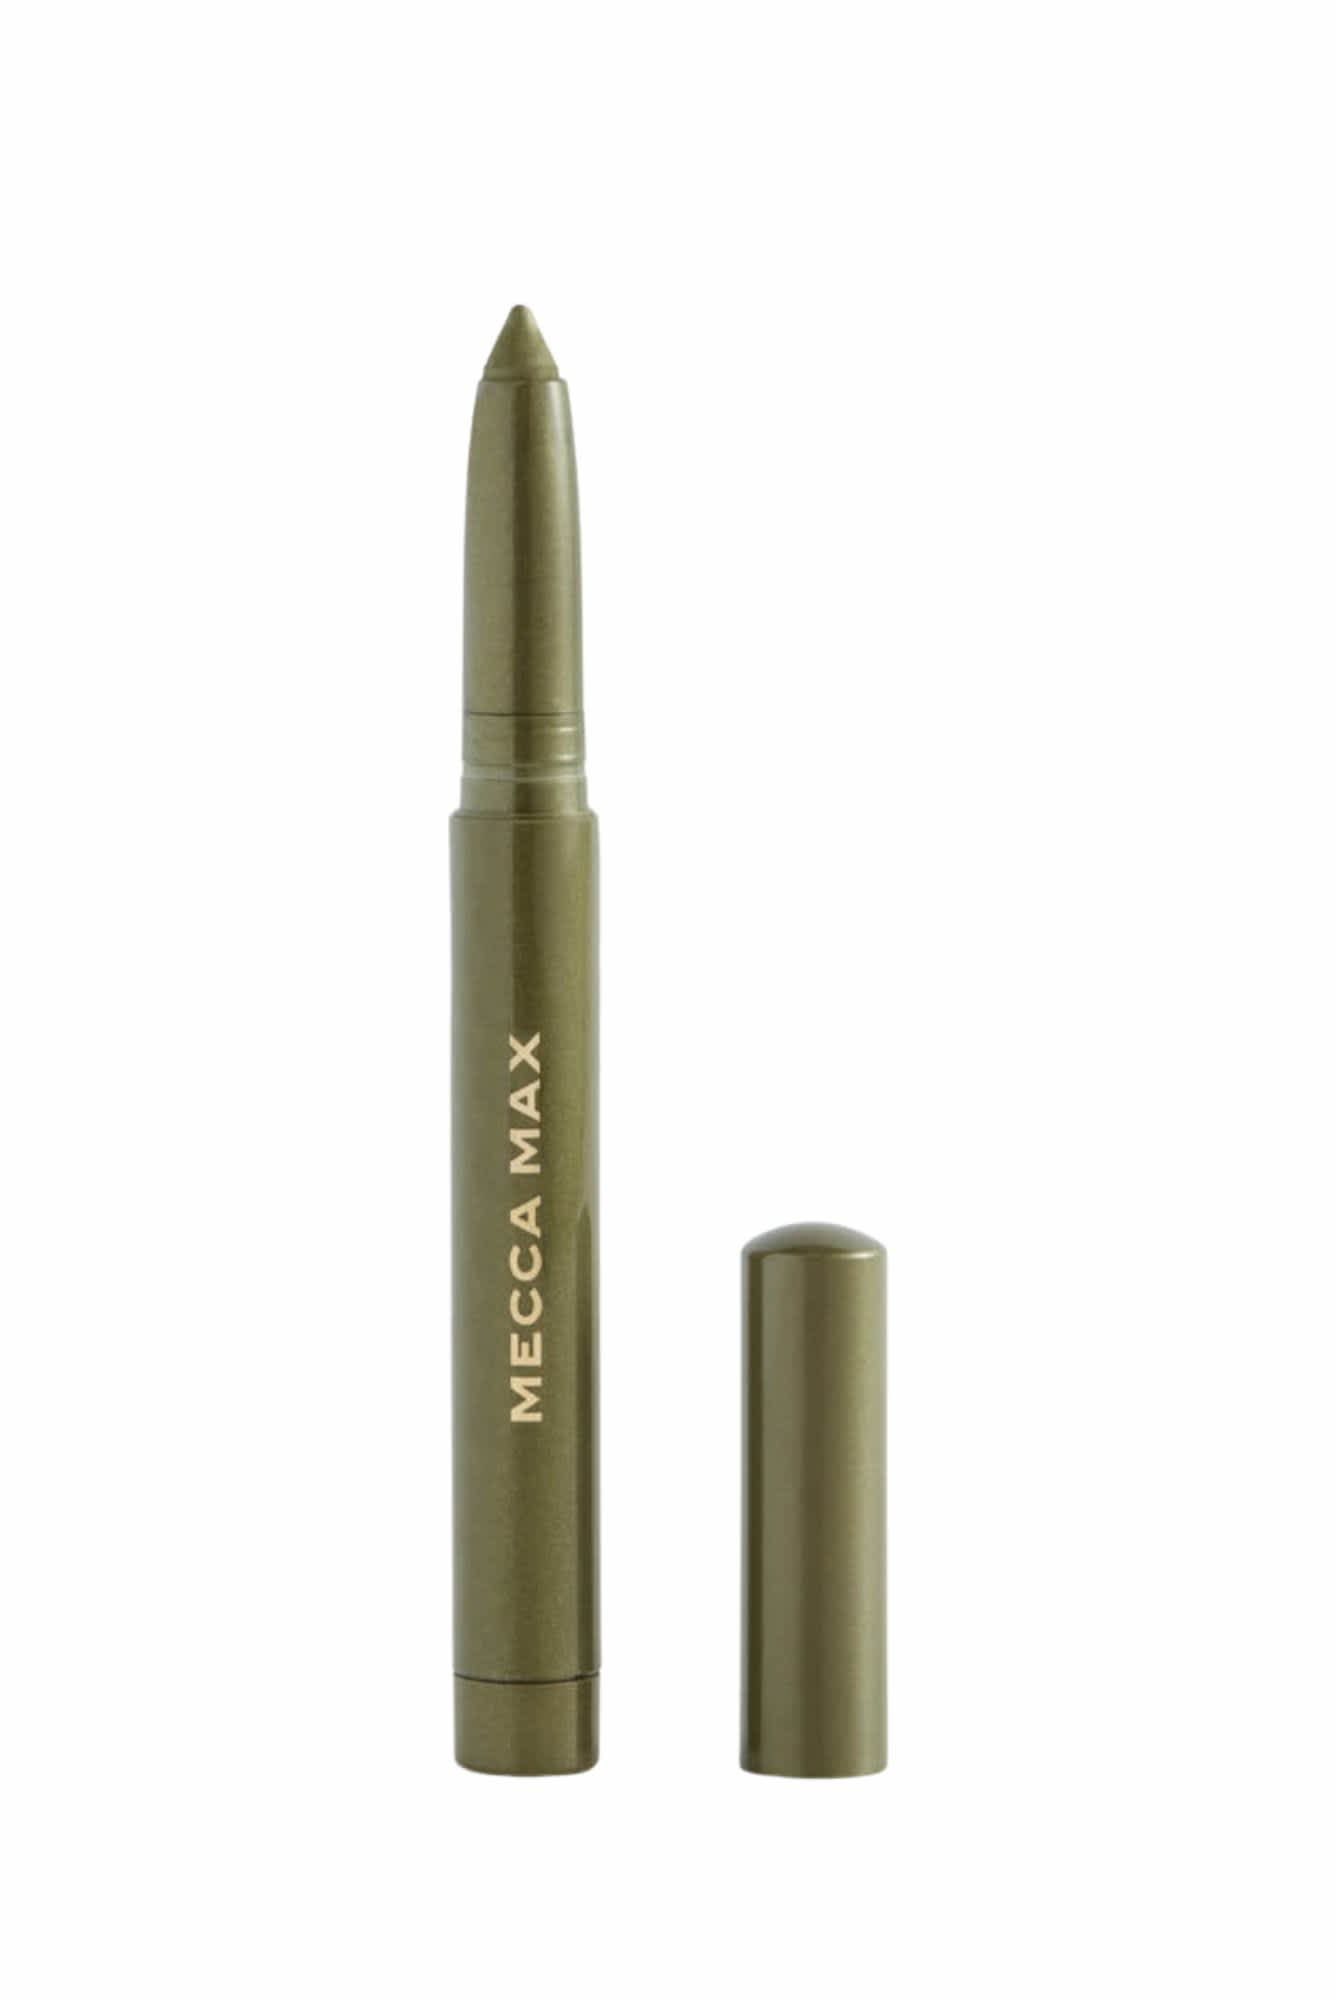 Mecca Max, Zoom Shadow Stick in "Olive" ($19)